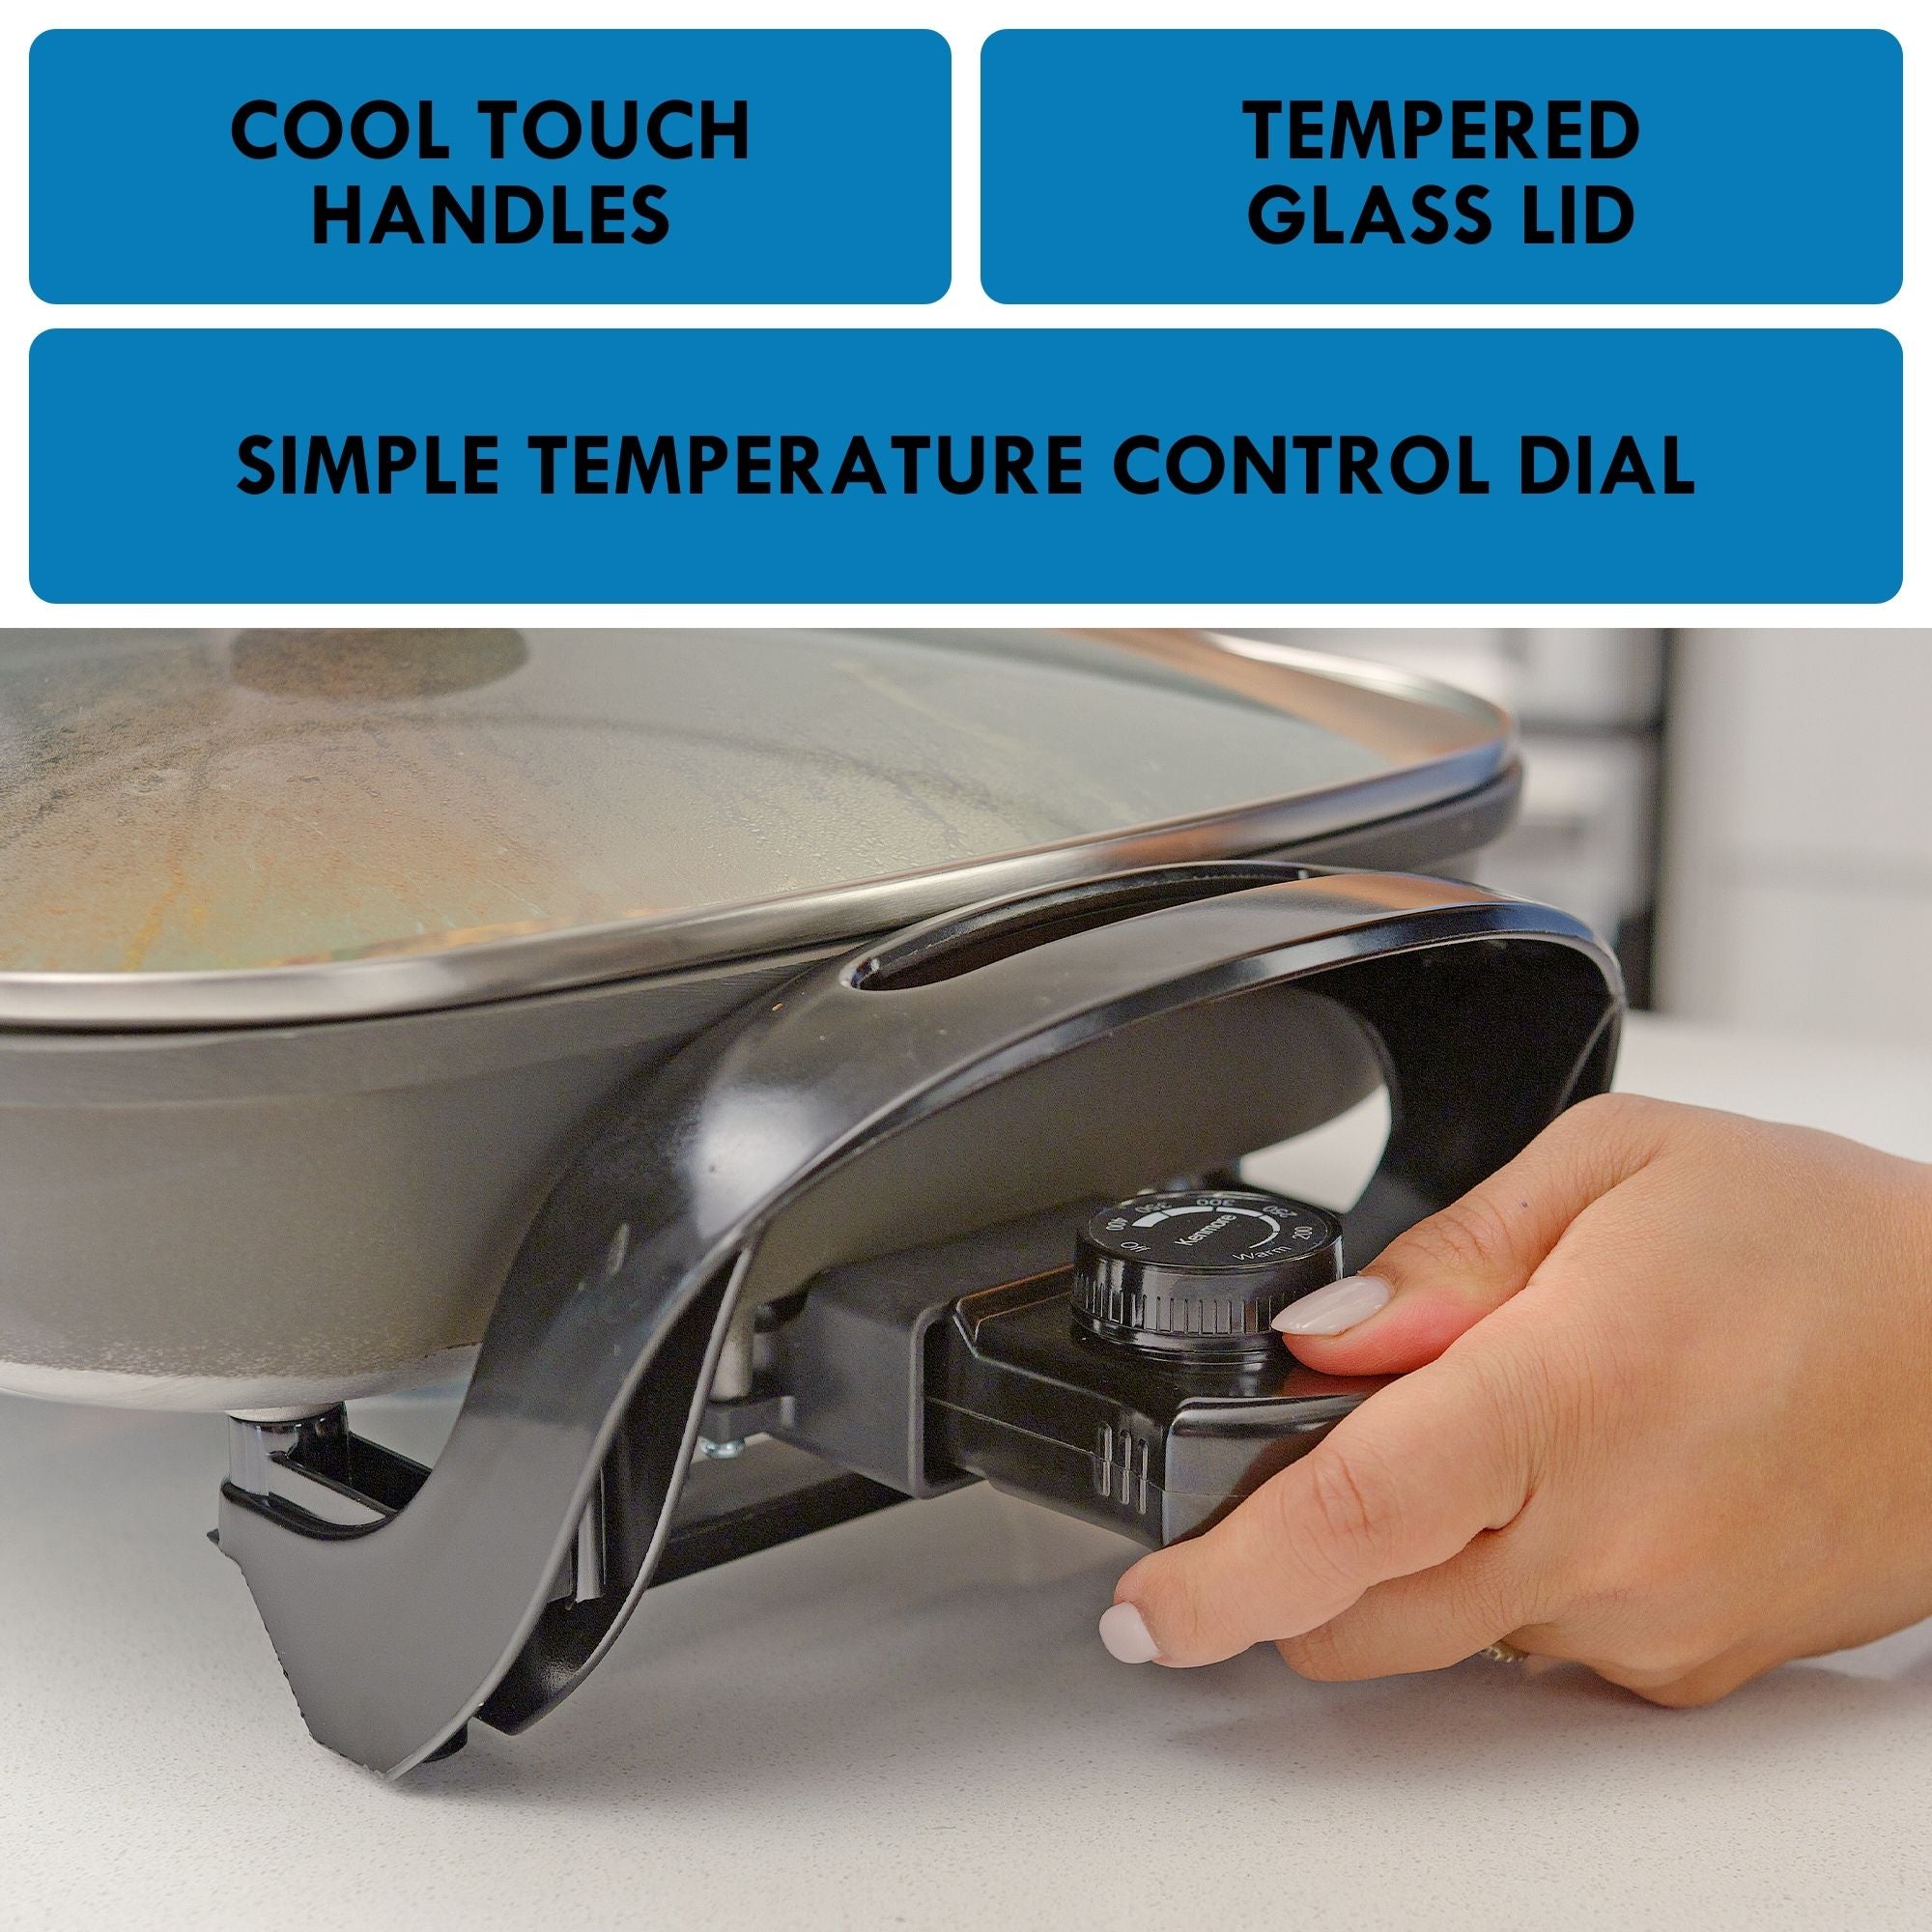 A person’s hand touching the temperature control dial on the side of the Kenmore non-stick electric skillet with glass lid with features listed above: Cool touch handles; tempered glass lid; simple temperature control dial.